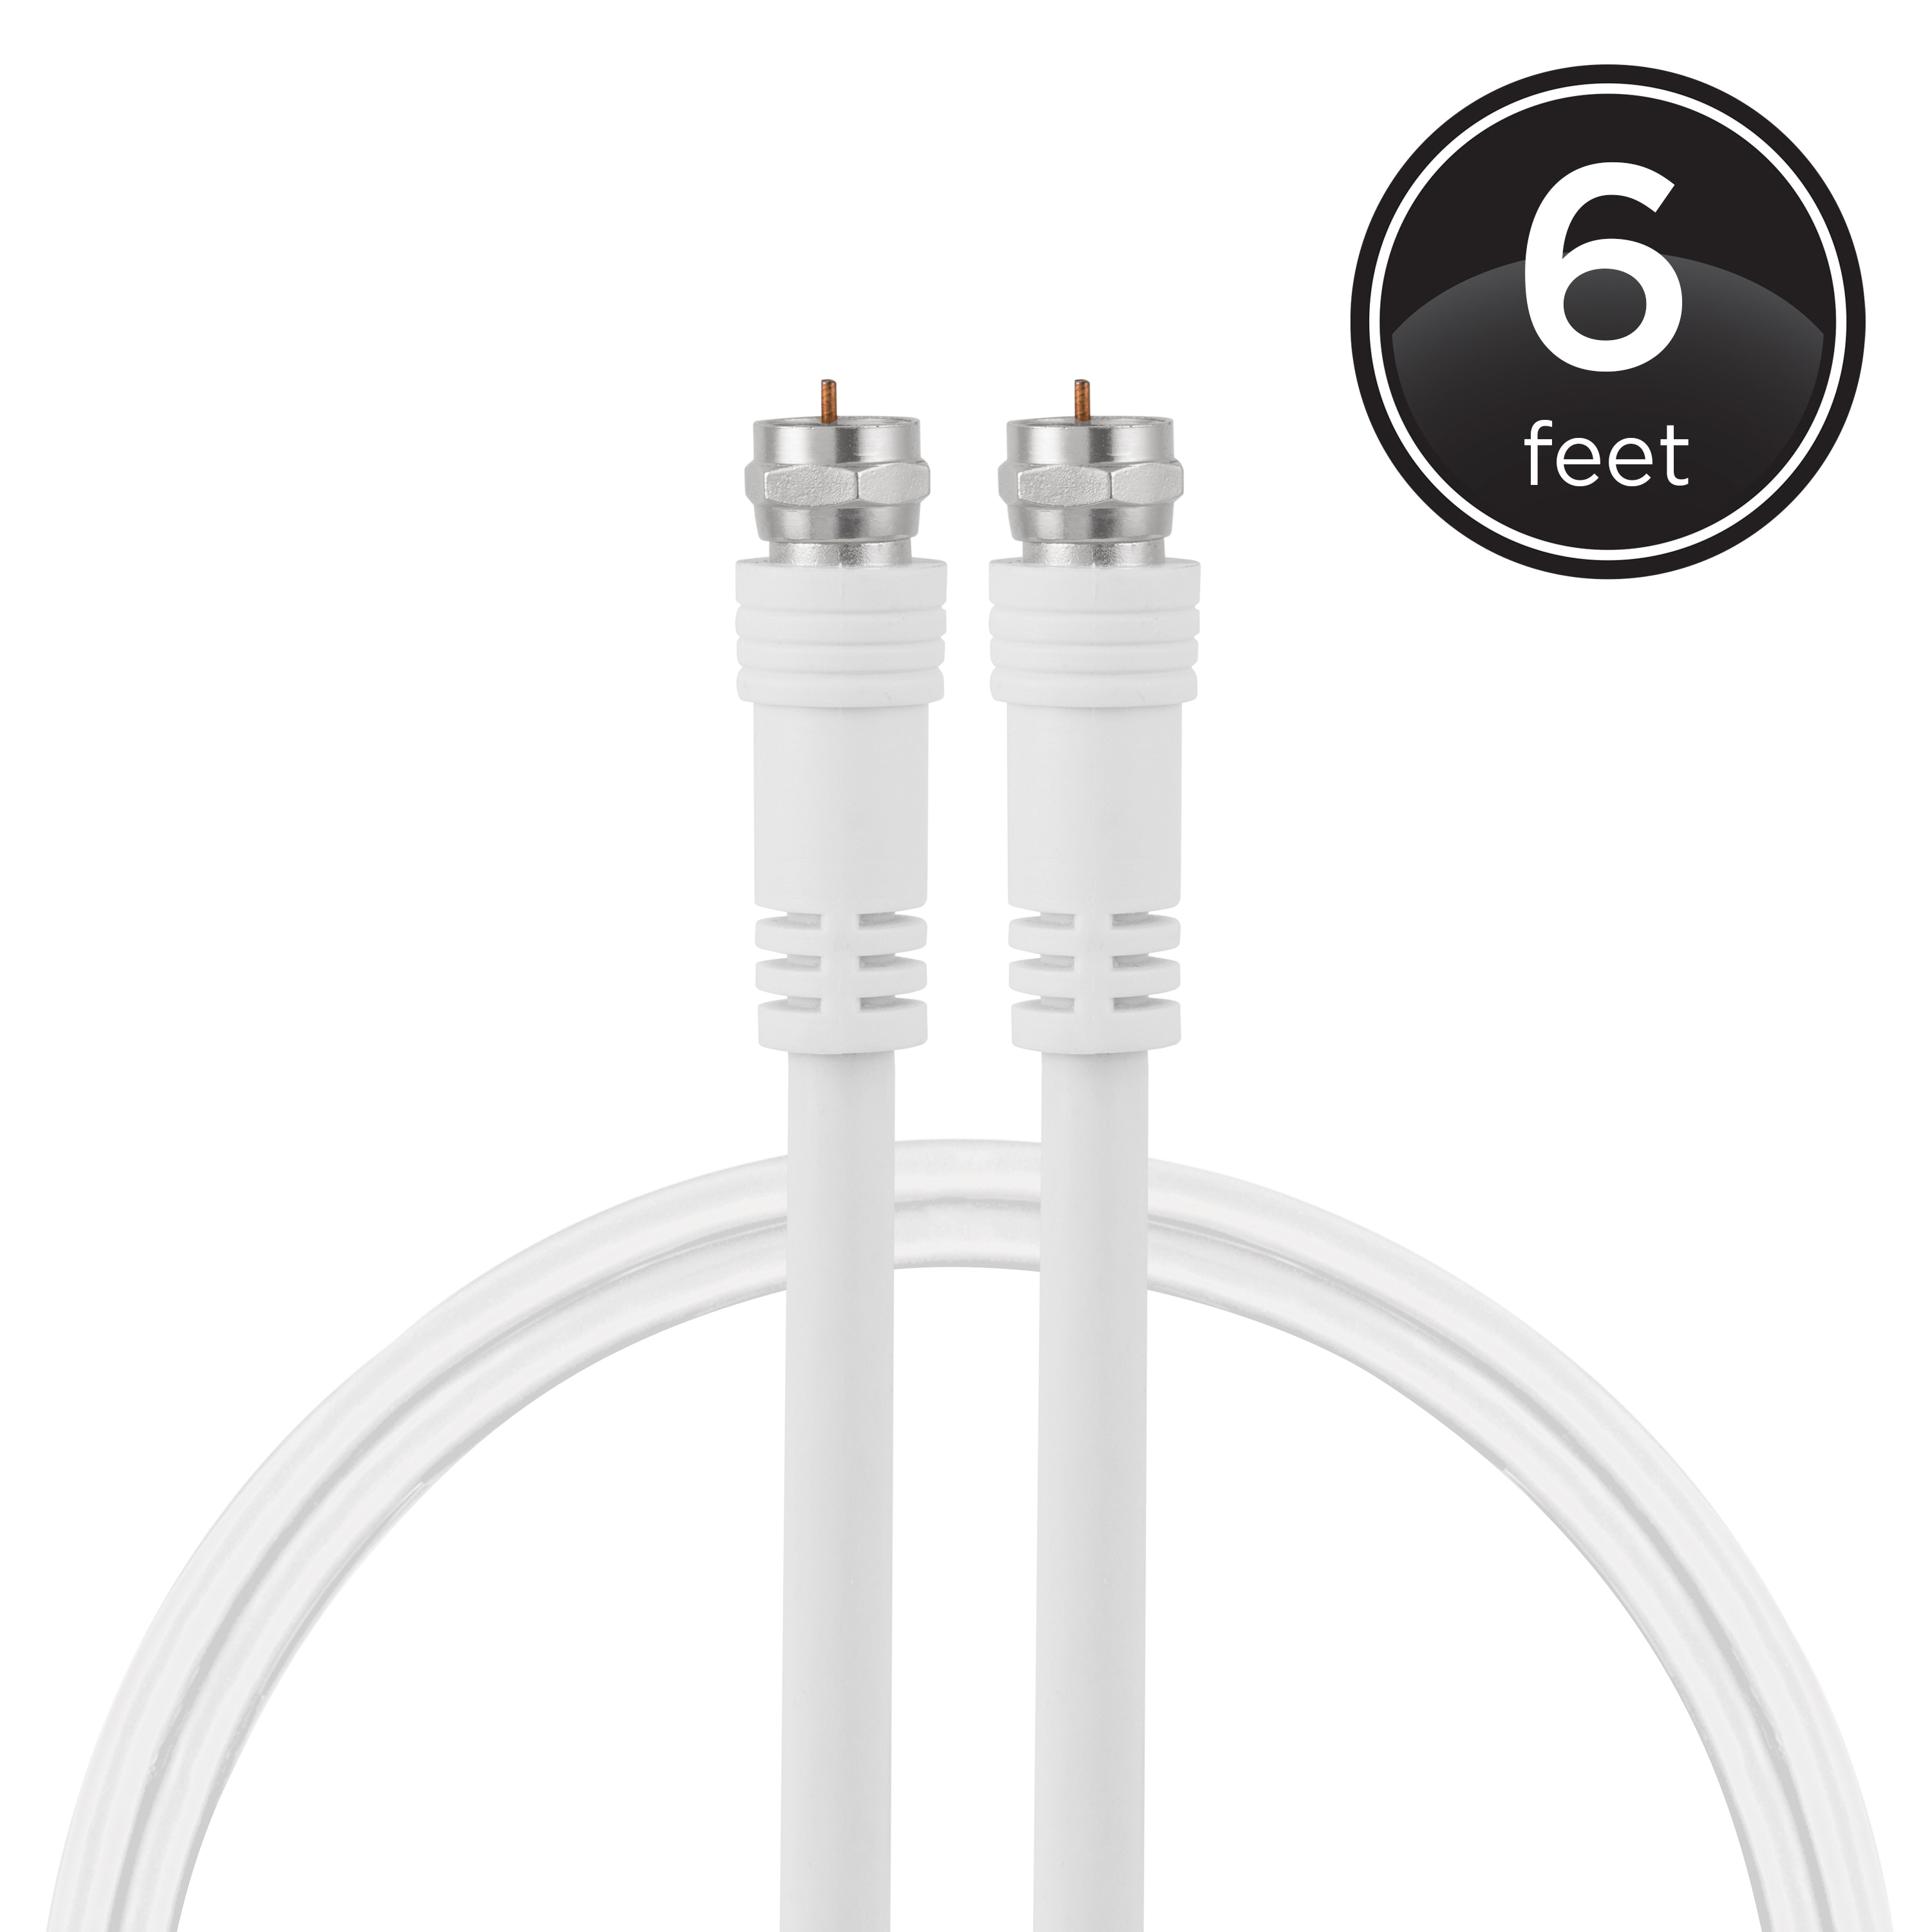 Dacada2005 white antenna Cable 25M/15M/10M/5M/3M/1.5M antenna Cable RG59  limited TV extension Cable, 100dB 4K Ultra HD UHD HDTV Full HD TV Cable, TV